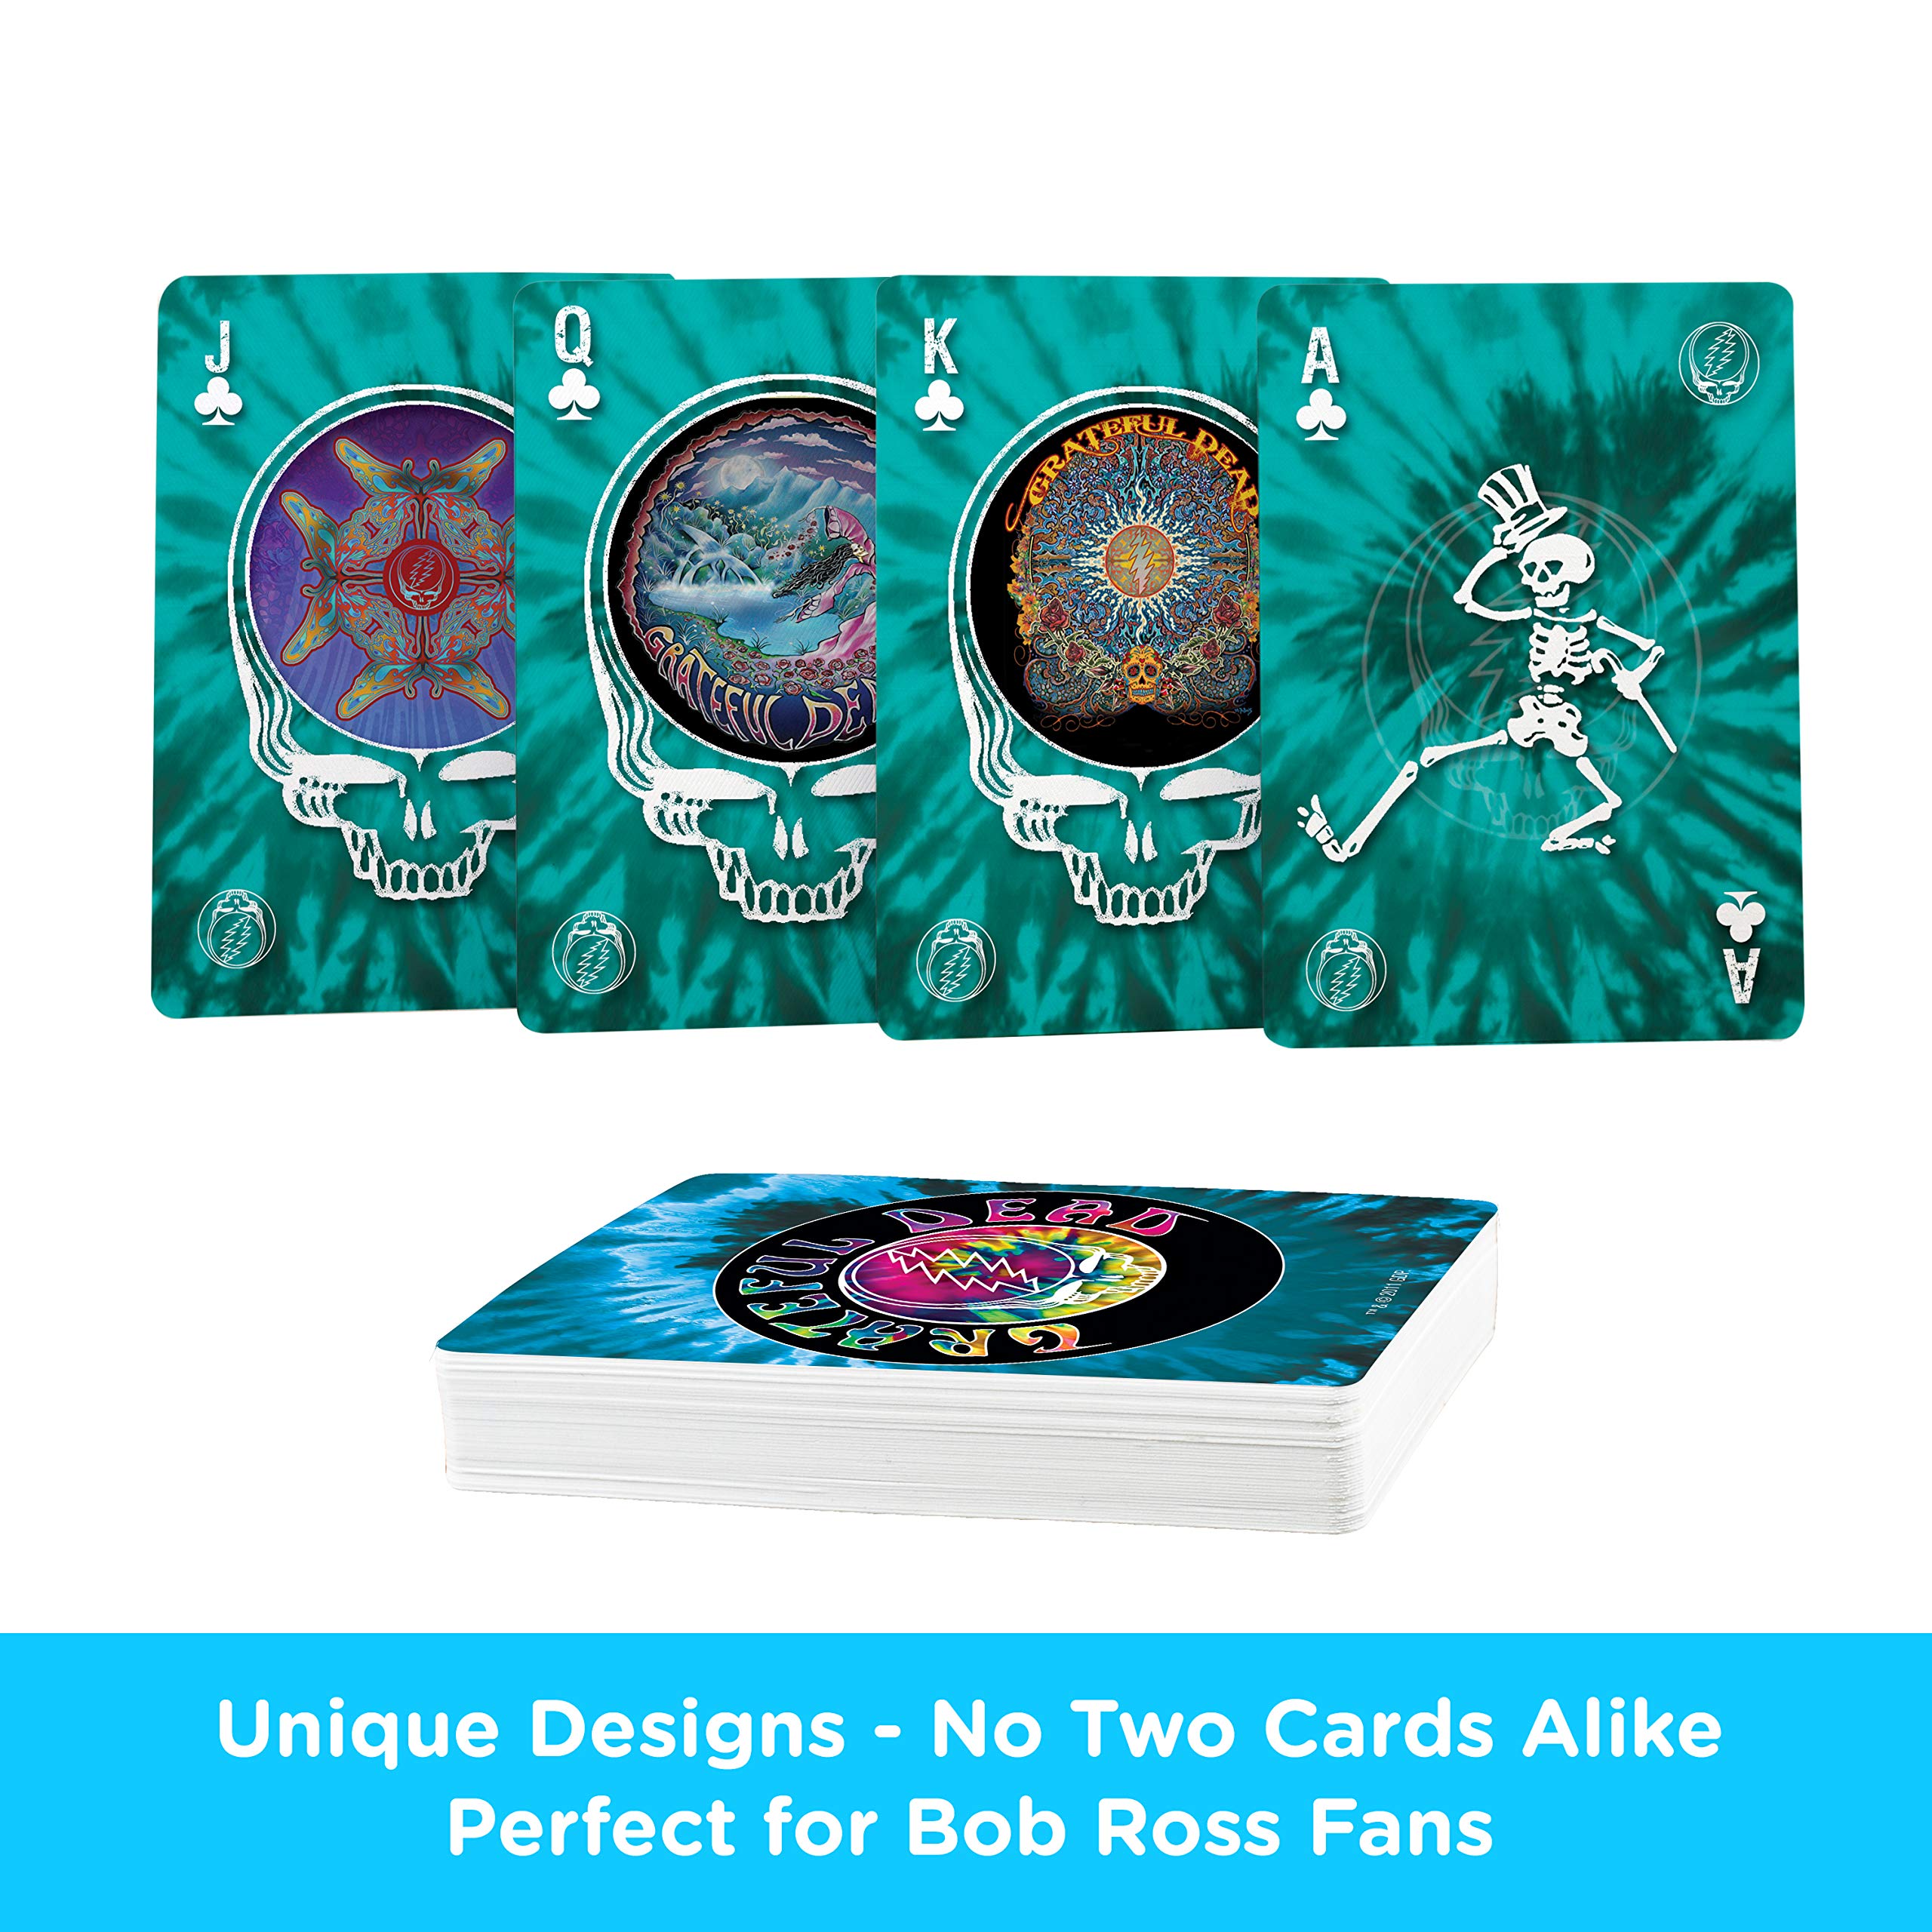 AQUARIUS Grateful Dead Playing Cards - Grateful Dead Themed Deck of Cards for Your Favorite Card Games - Officially Licensed Grateful Dead Merchandise & Collectibles